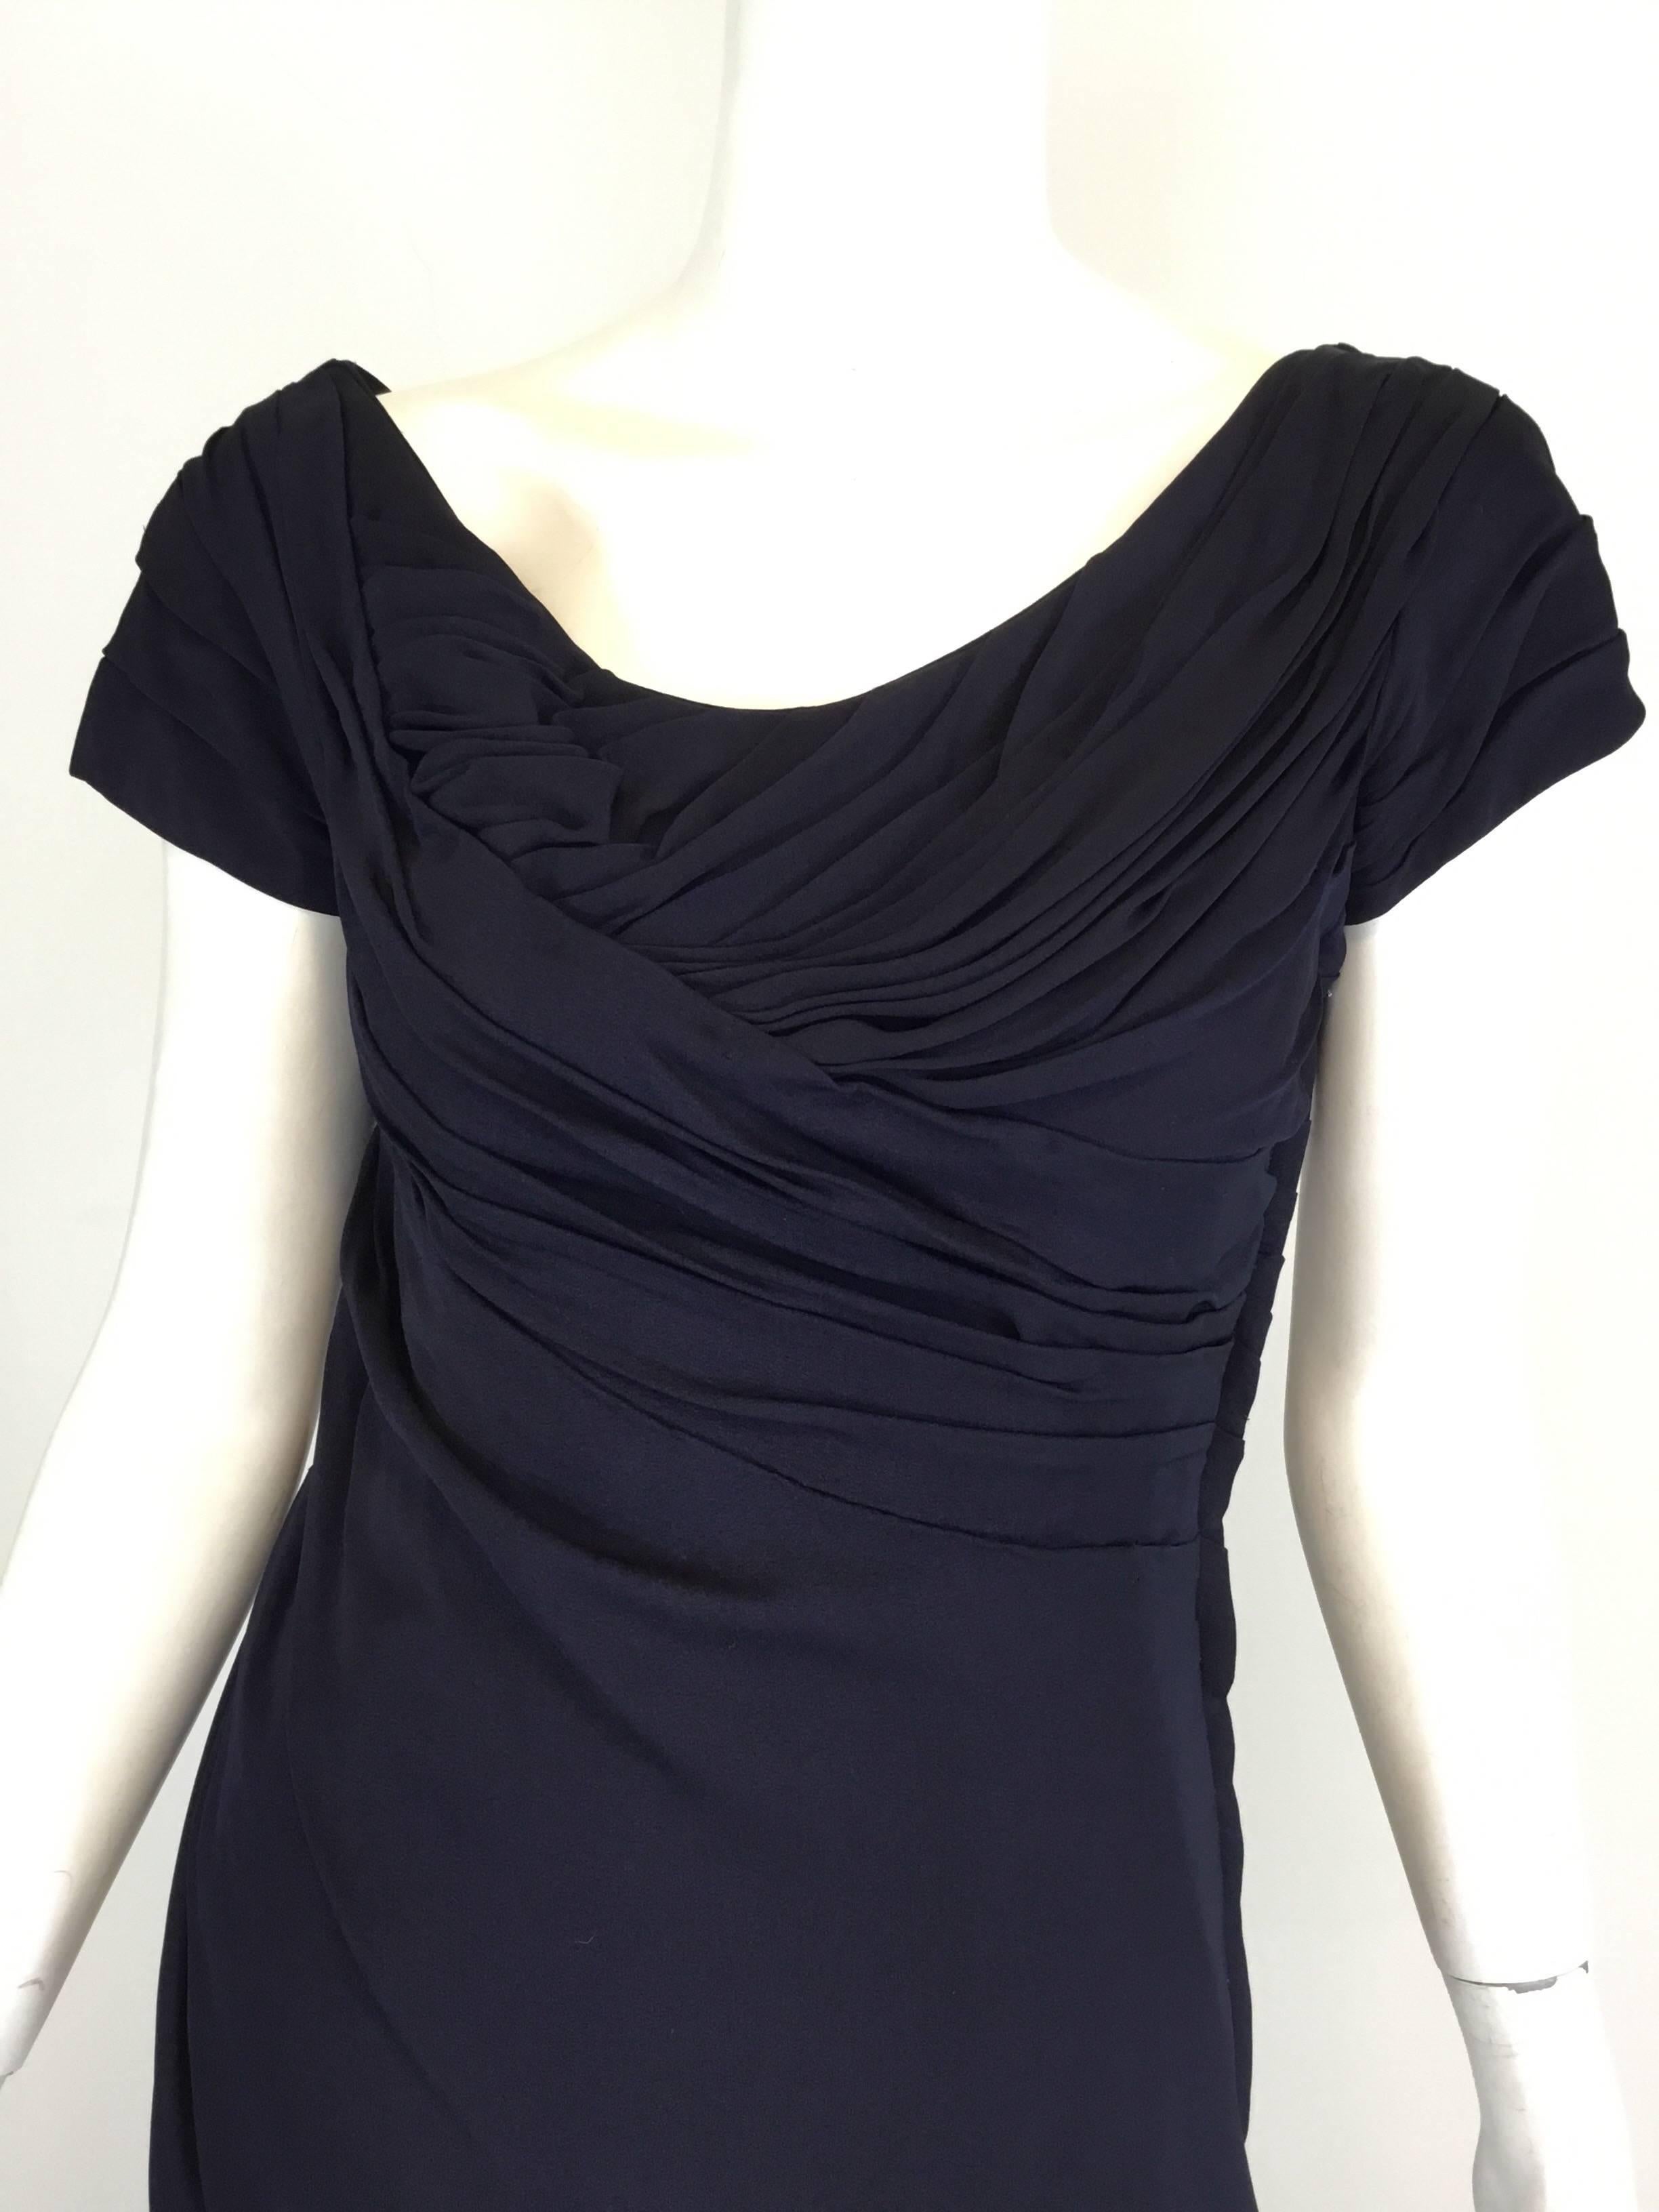 Vintage Ceil Chapman matte jersey dress in navy with a ruched upper bodice and a concealed side zipper fastening. Fully lined.

Measurements: Jersey has some stretch
bust 33'', waist 28'', hips 34'', length 41''